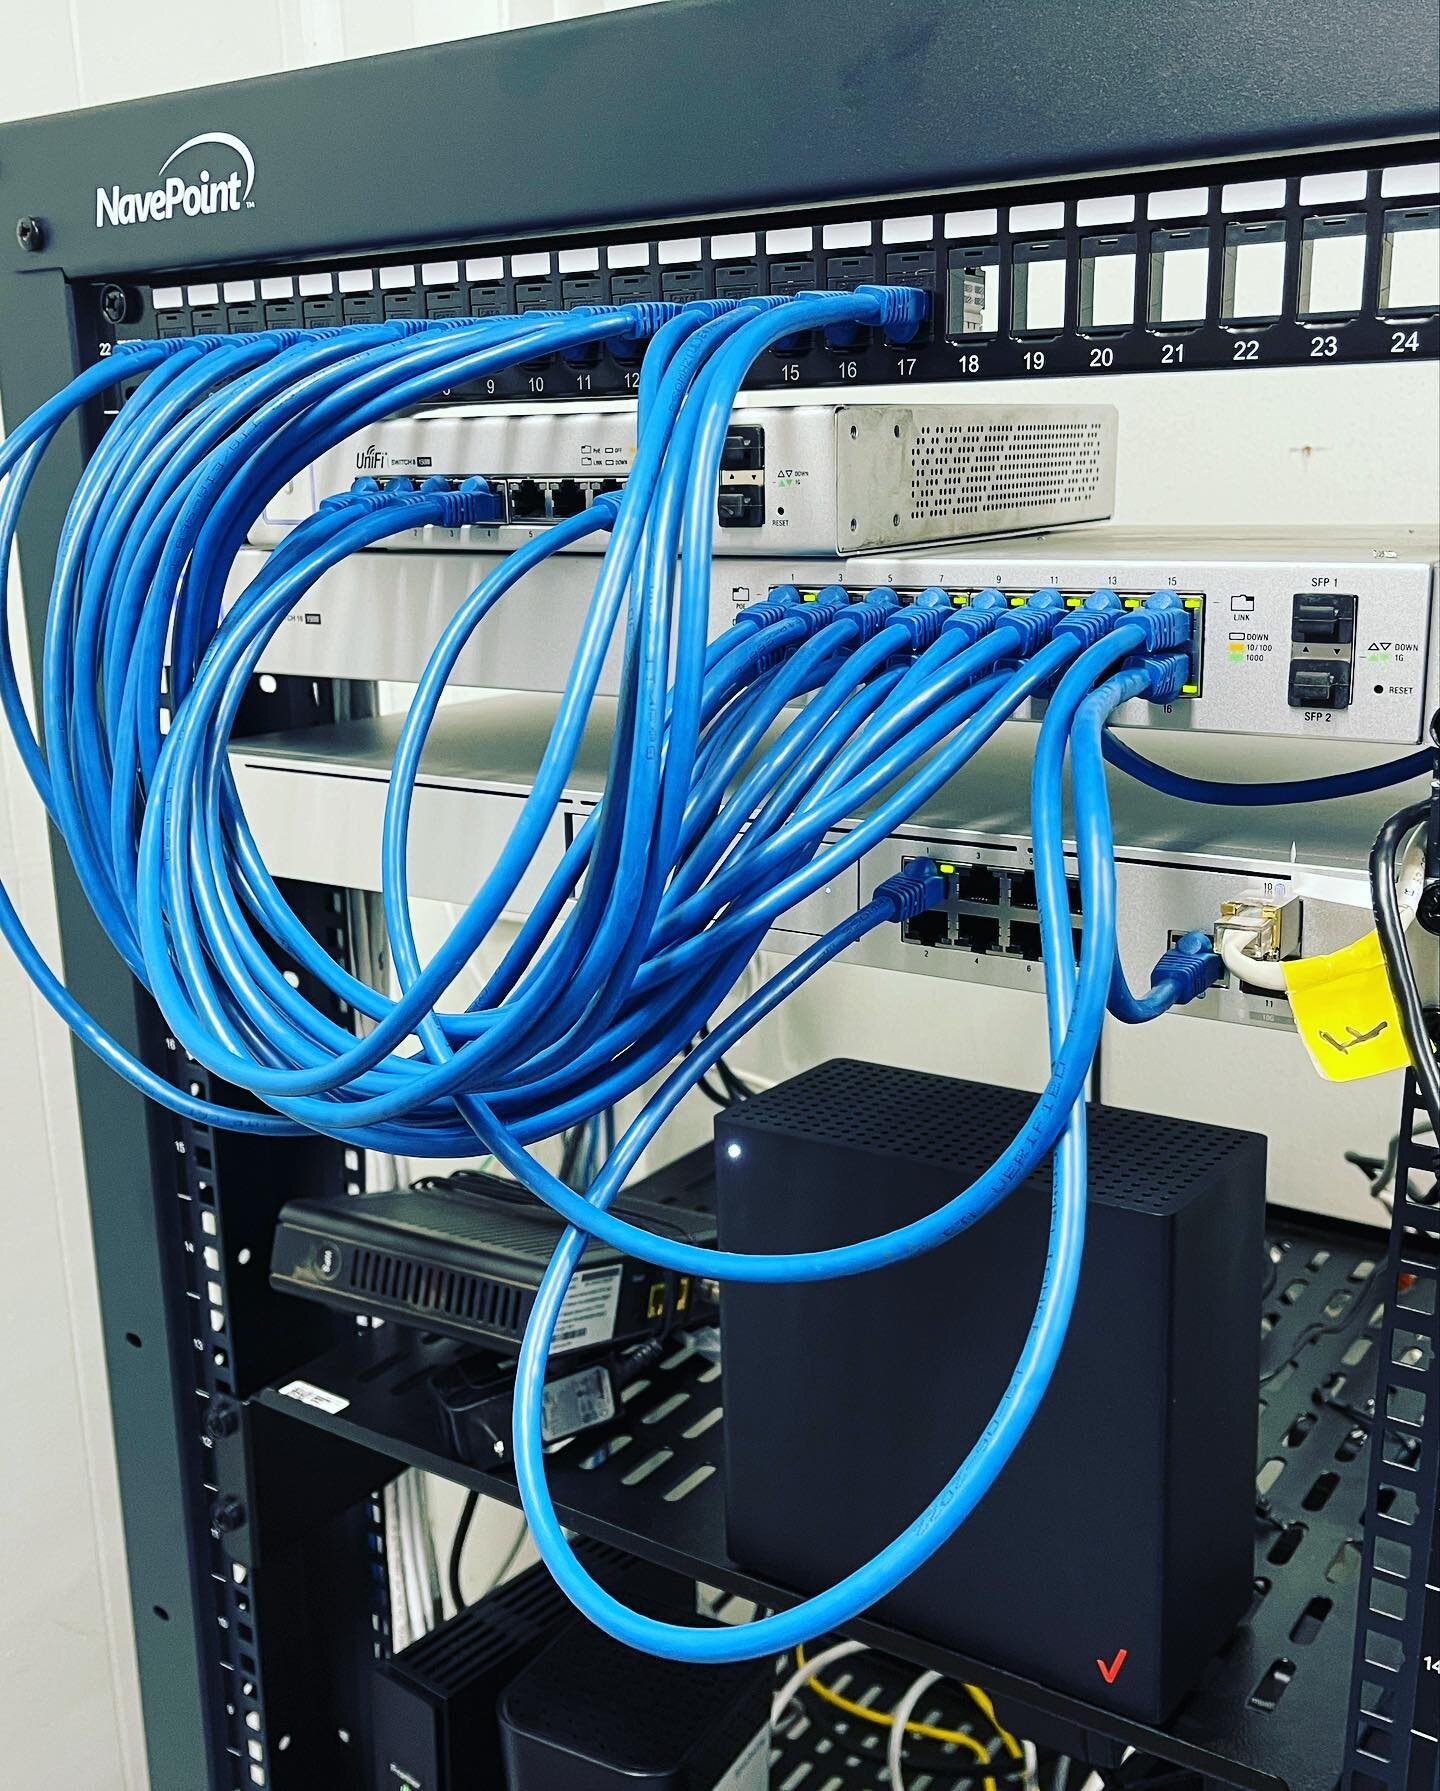 Another Ubiquiti Dream Machine install done. These guys sure make some nice products that work great together. Hit us up if you need any Ubiquiti support or products! #ui #ubiquiti #dreammachinepro #unifinetwork #unifiaccesspoint #unifiswitch #solide